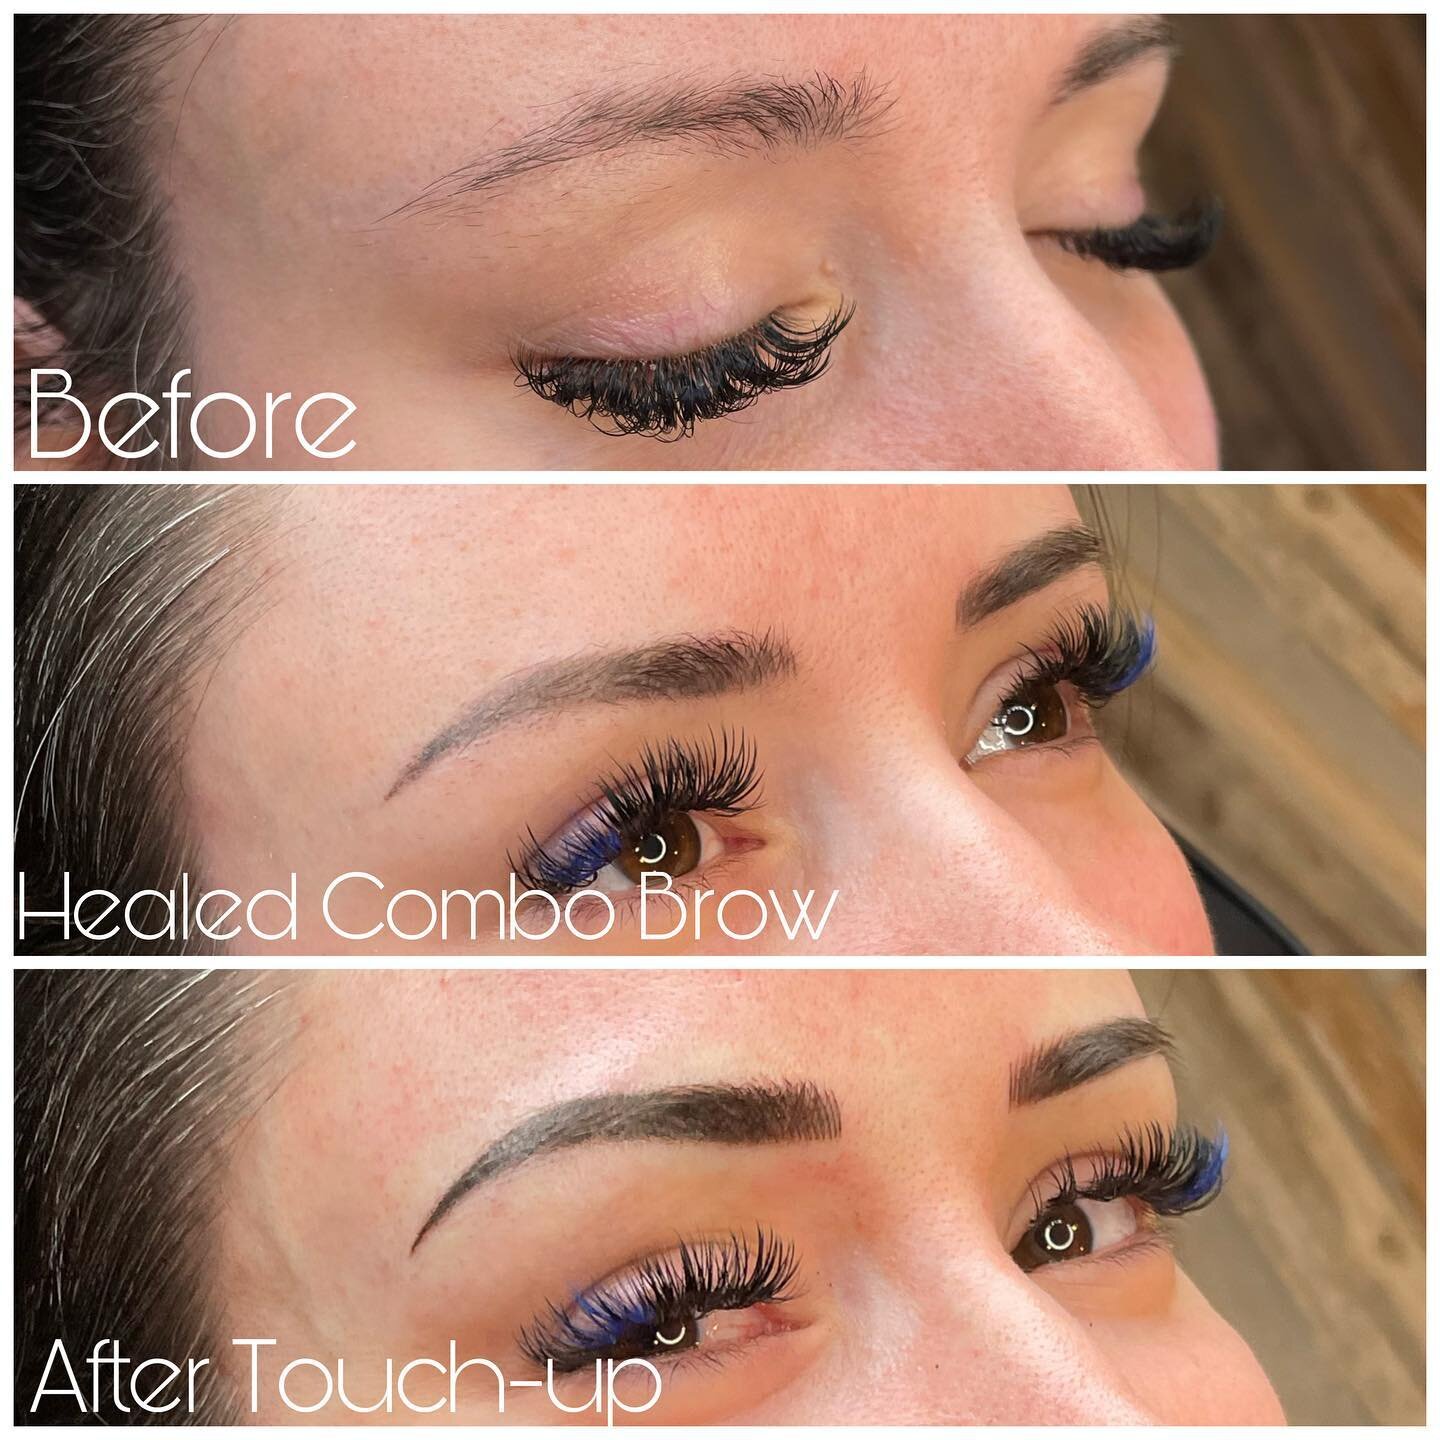 Touched up this lovely client&rsquo;s brows. She wanted a more bold, makeup type of look and combo brows are the perfect fit for that. She had great retention when she came in for her touch up. Touch ups are scheduled approximately 4-6 weeks out from